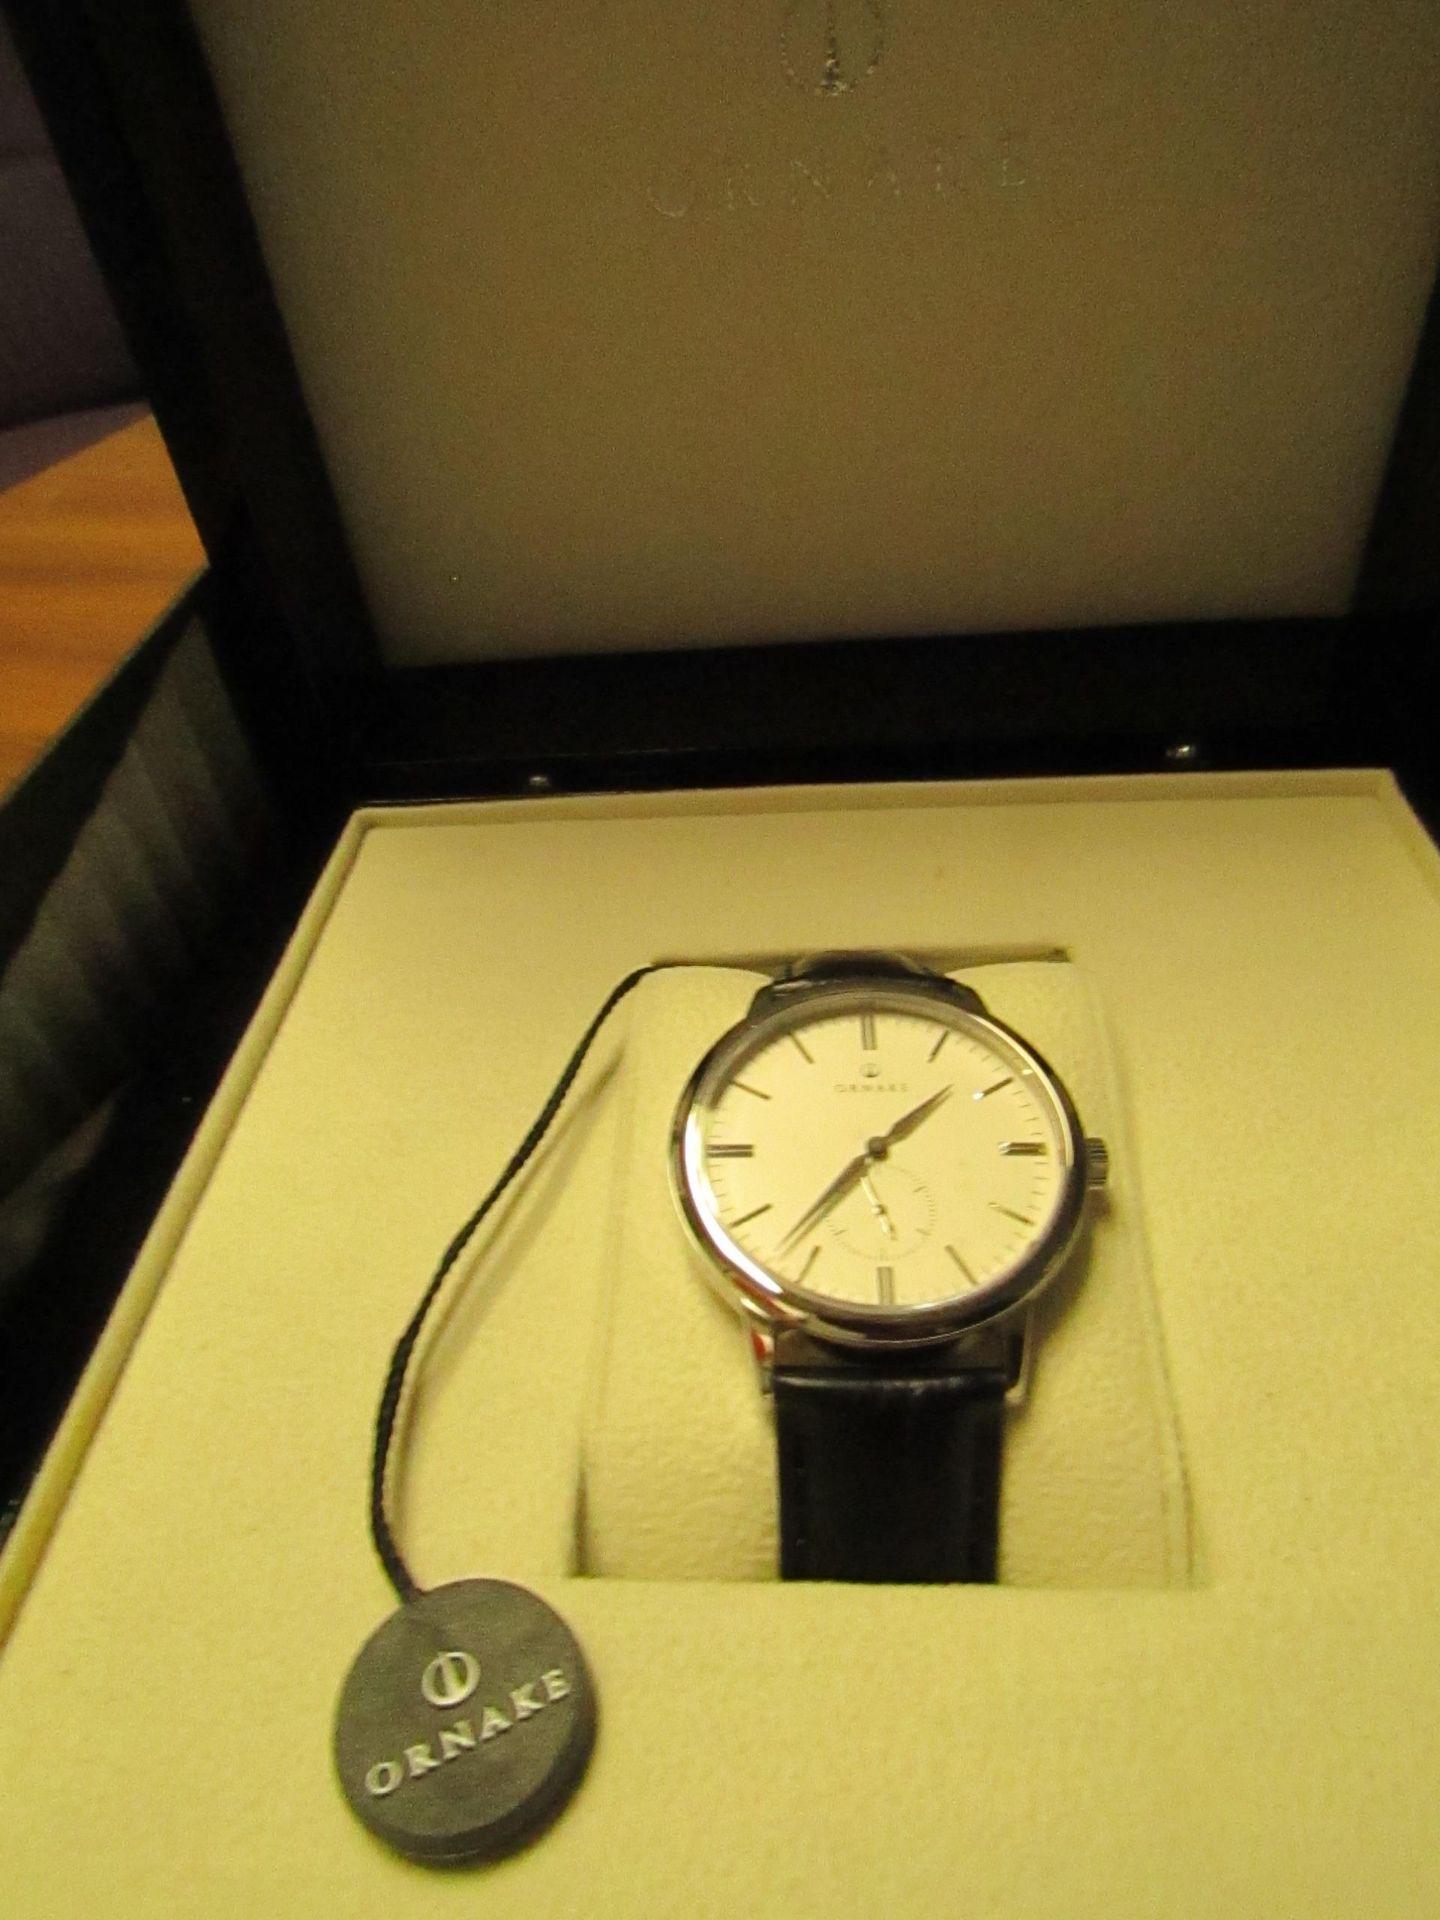 Ornake watch, miyota movement, white and silver with black leather strap, new, Boxed and ticking.